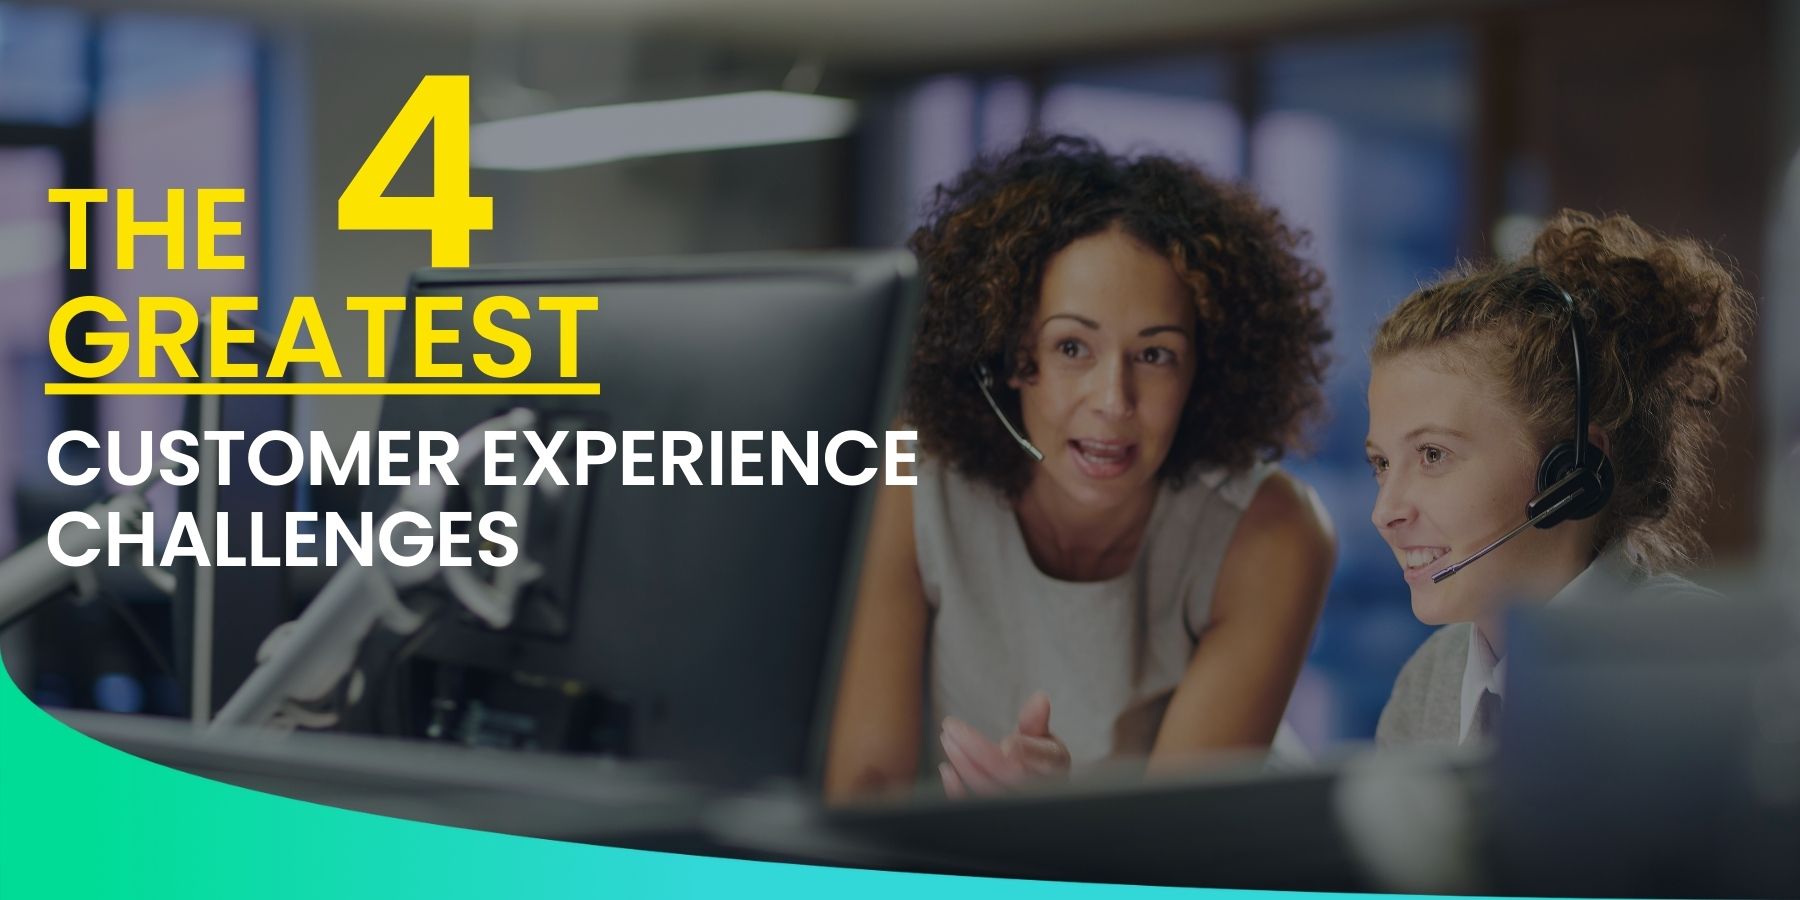 Featured image for “The 4 Greatest Customer Experience Challenges”